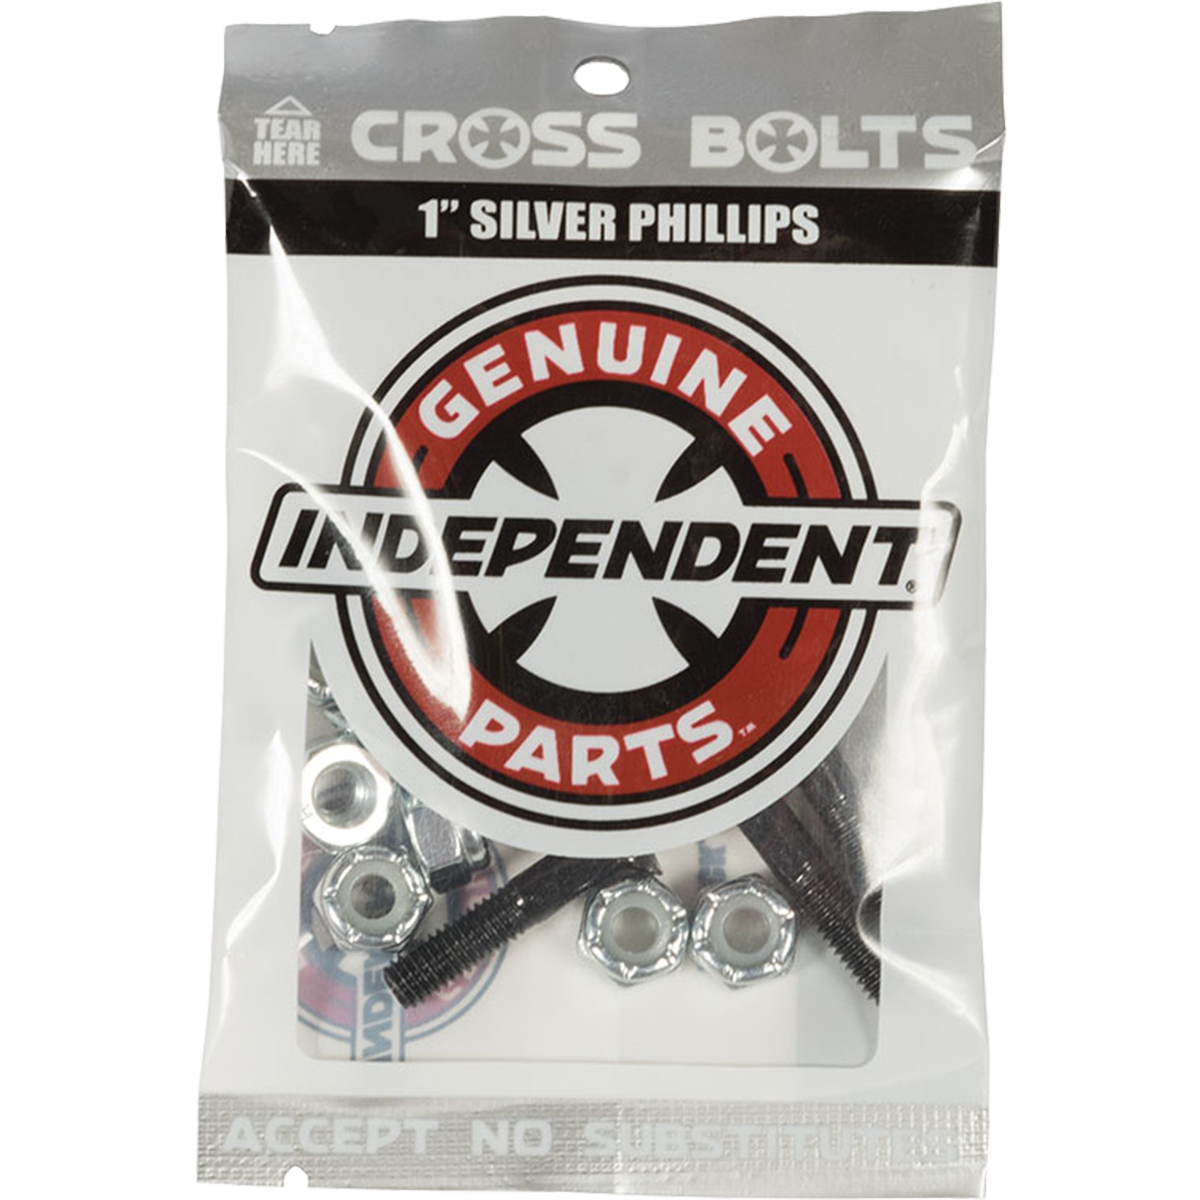 Independent Cross Bolts 1” Silver Philips Skate Hardware